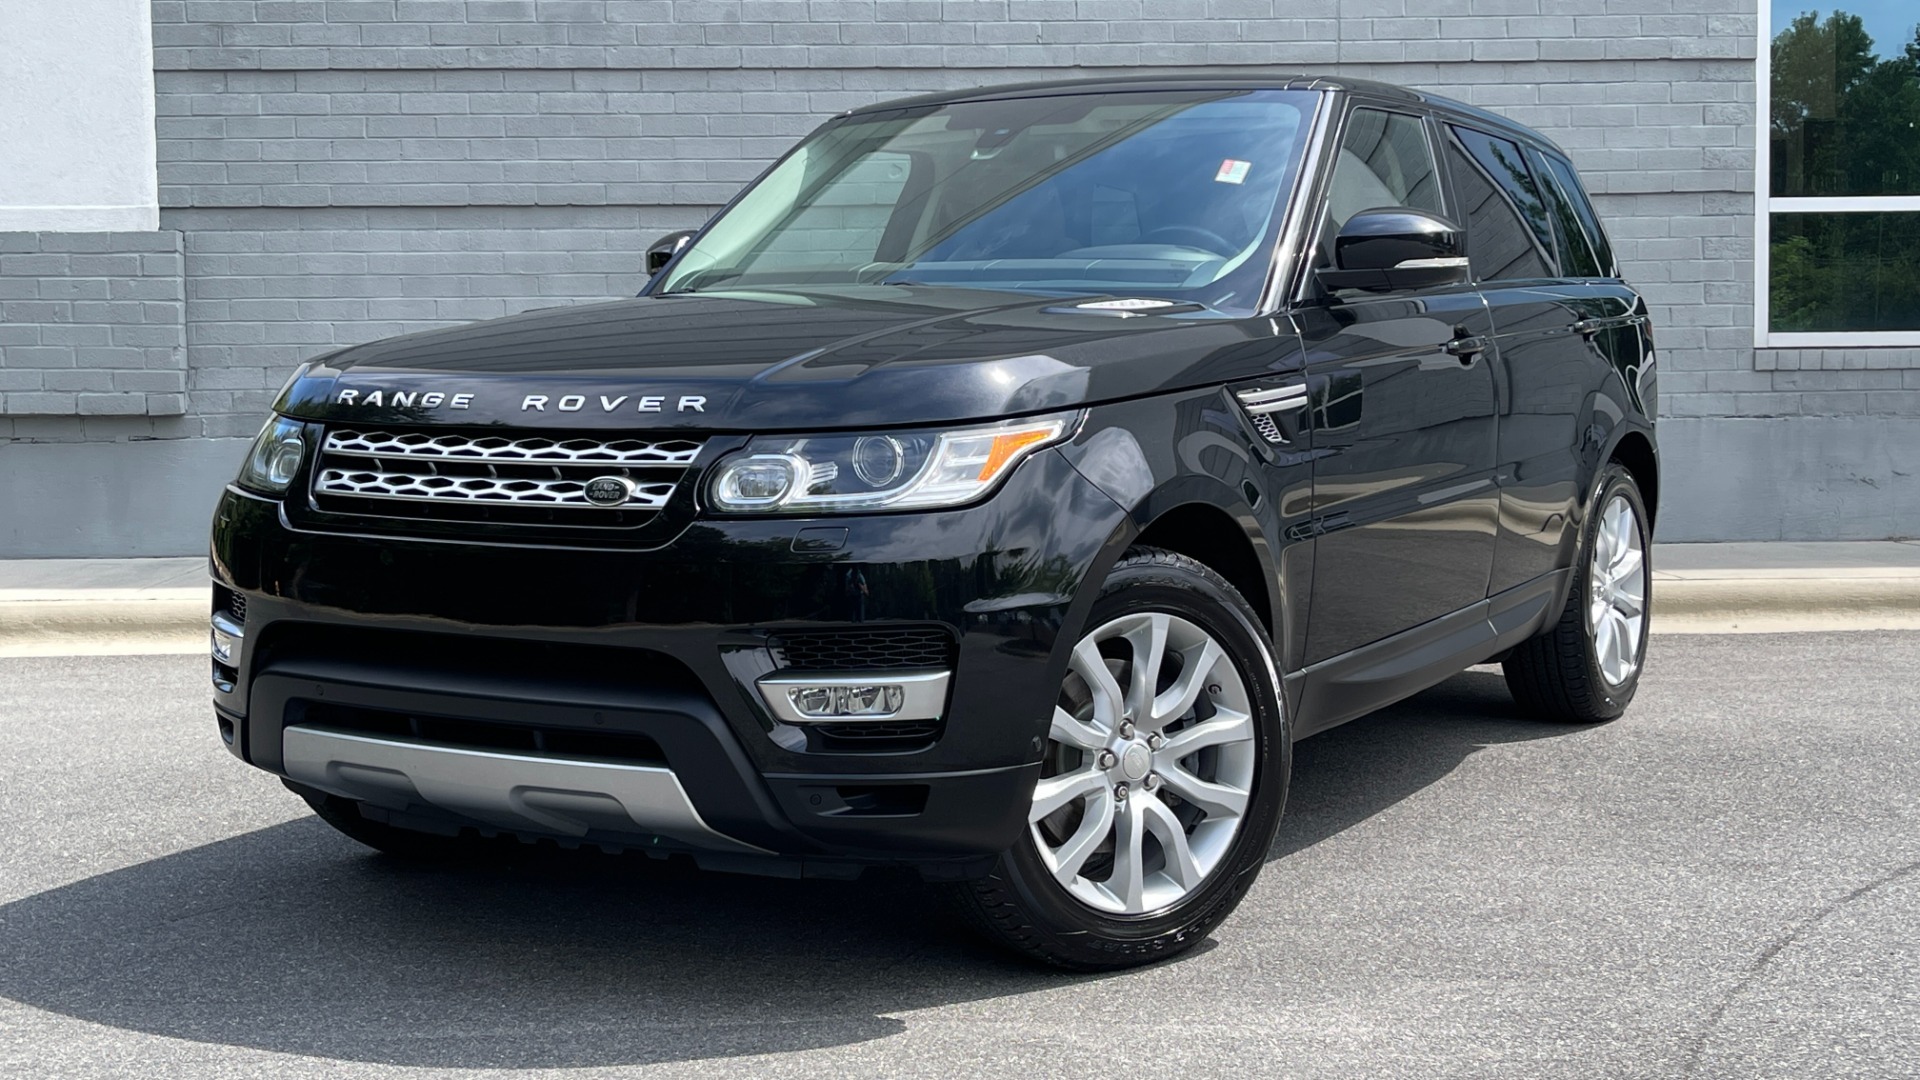 Used 2015 Land Rover Range Rover Sport HSE / SUPERCHARGED / MERIDIAN SOUND / DRIVER ASSISTANCE / PANORAMIC ROOF /  for sale Sold at Formula Imports in Charlotte NC 28227 3